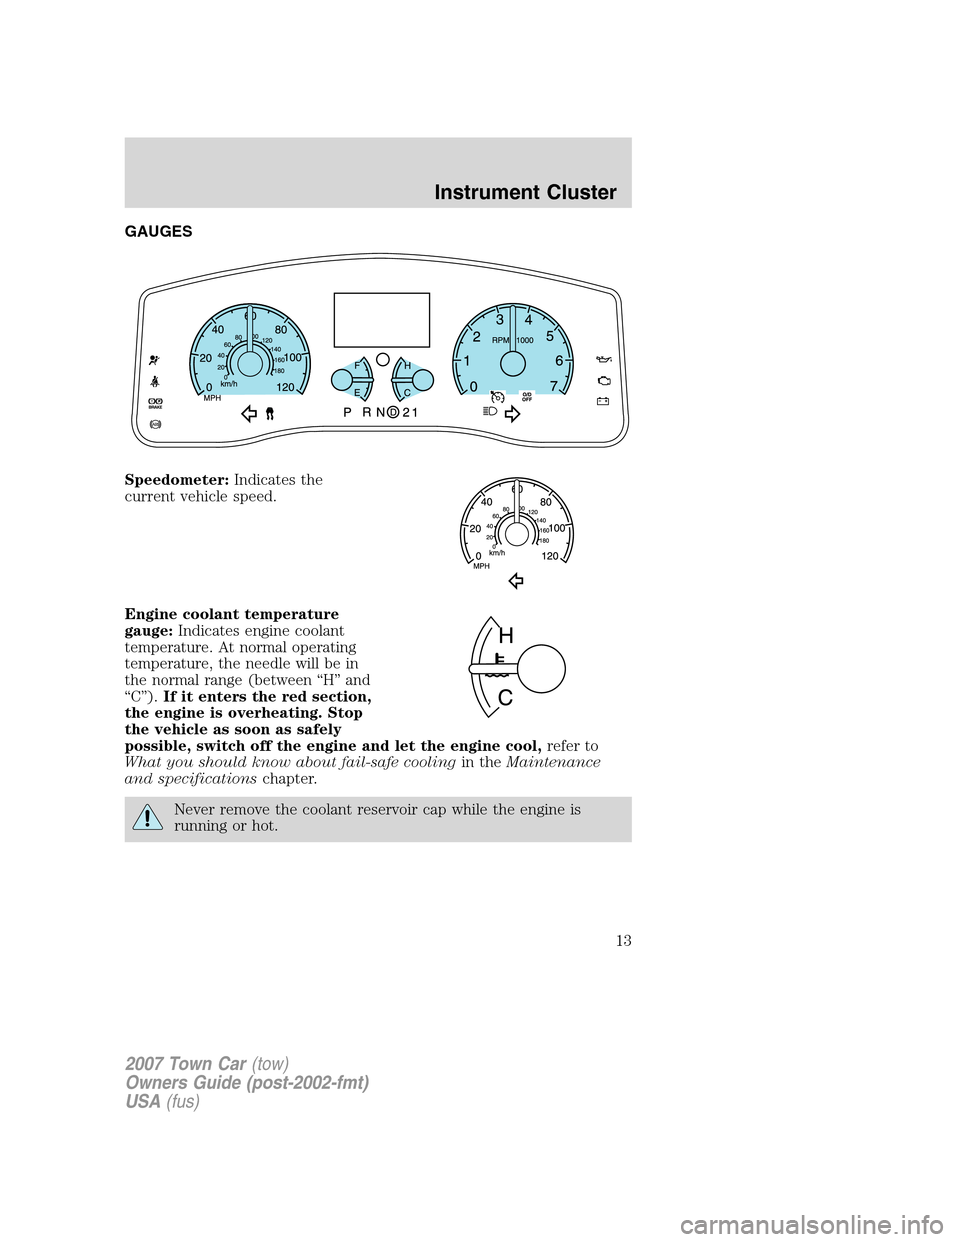 LINCOLN TOWN CAR 2007 User Guide GAUGES
Speedometer:Indicates the
current vehicle speed.
Engine coolant temperature
gauge:Indicates engine coolant
temperature. At normal operating
temperature, the needle will be in
the normal range (